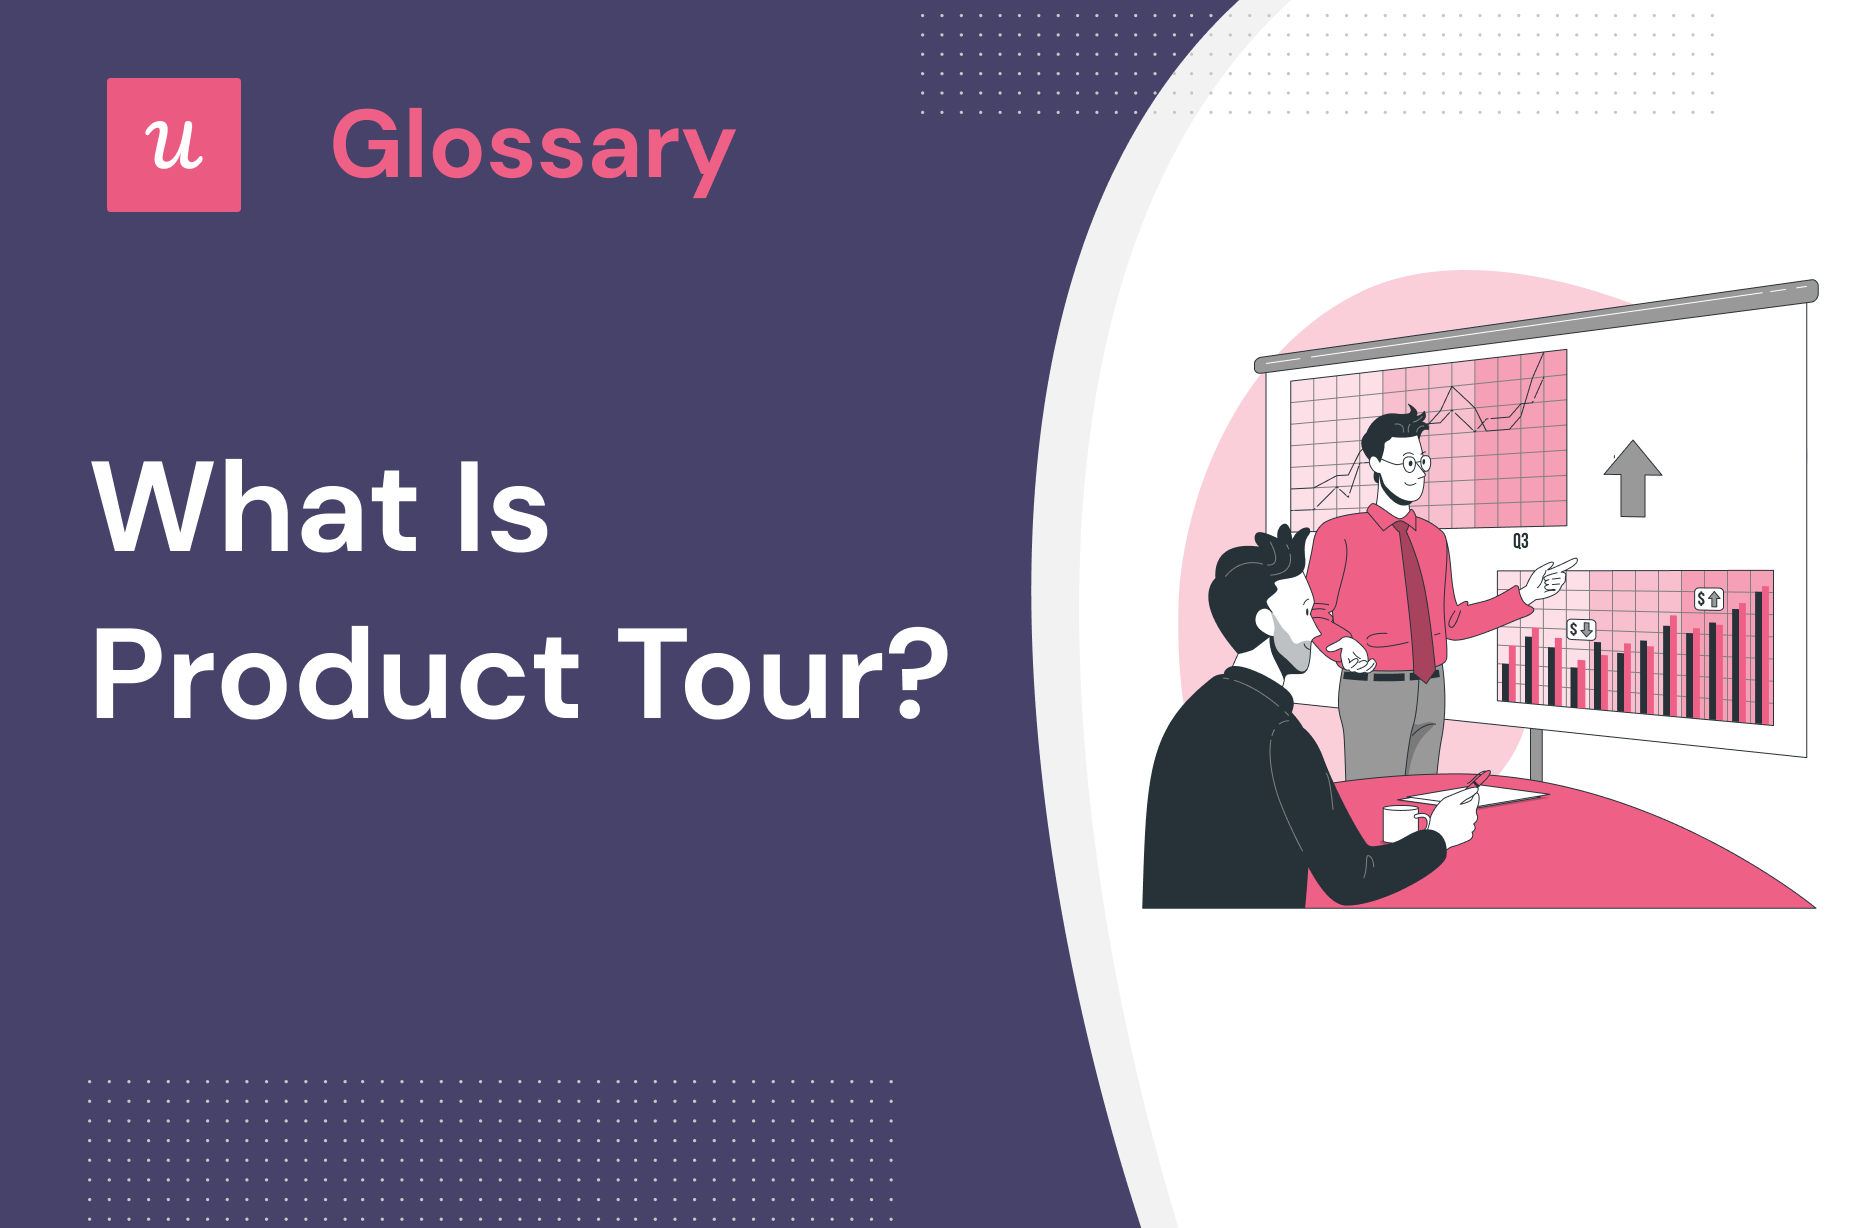 What is Product Tour?